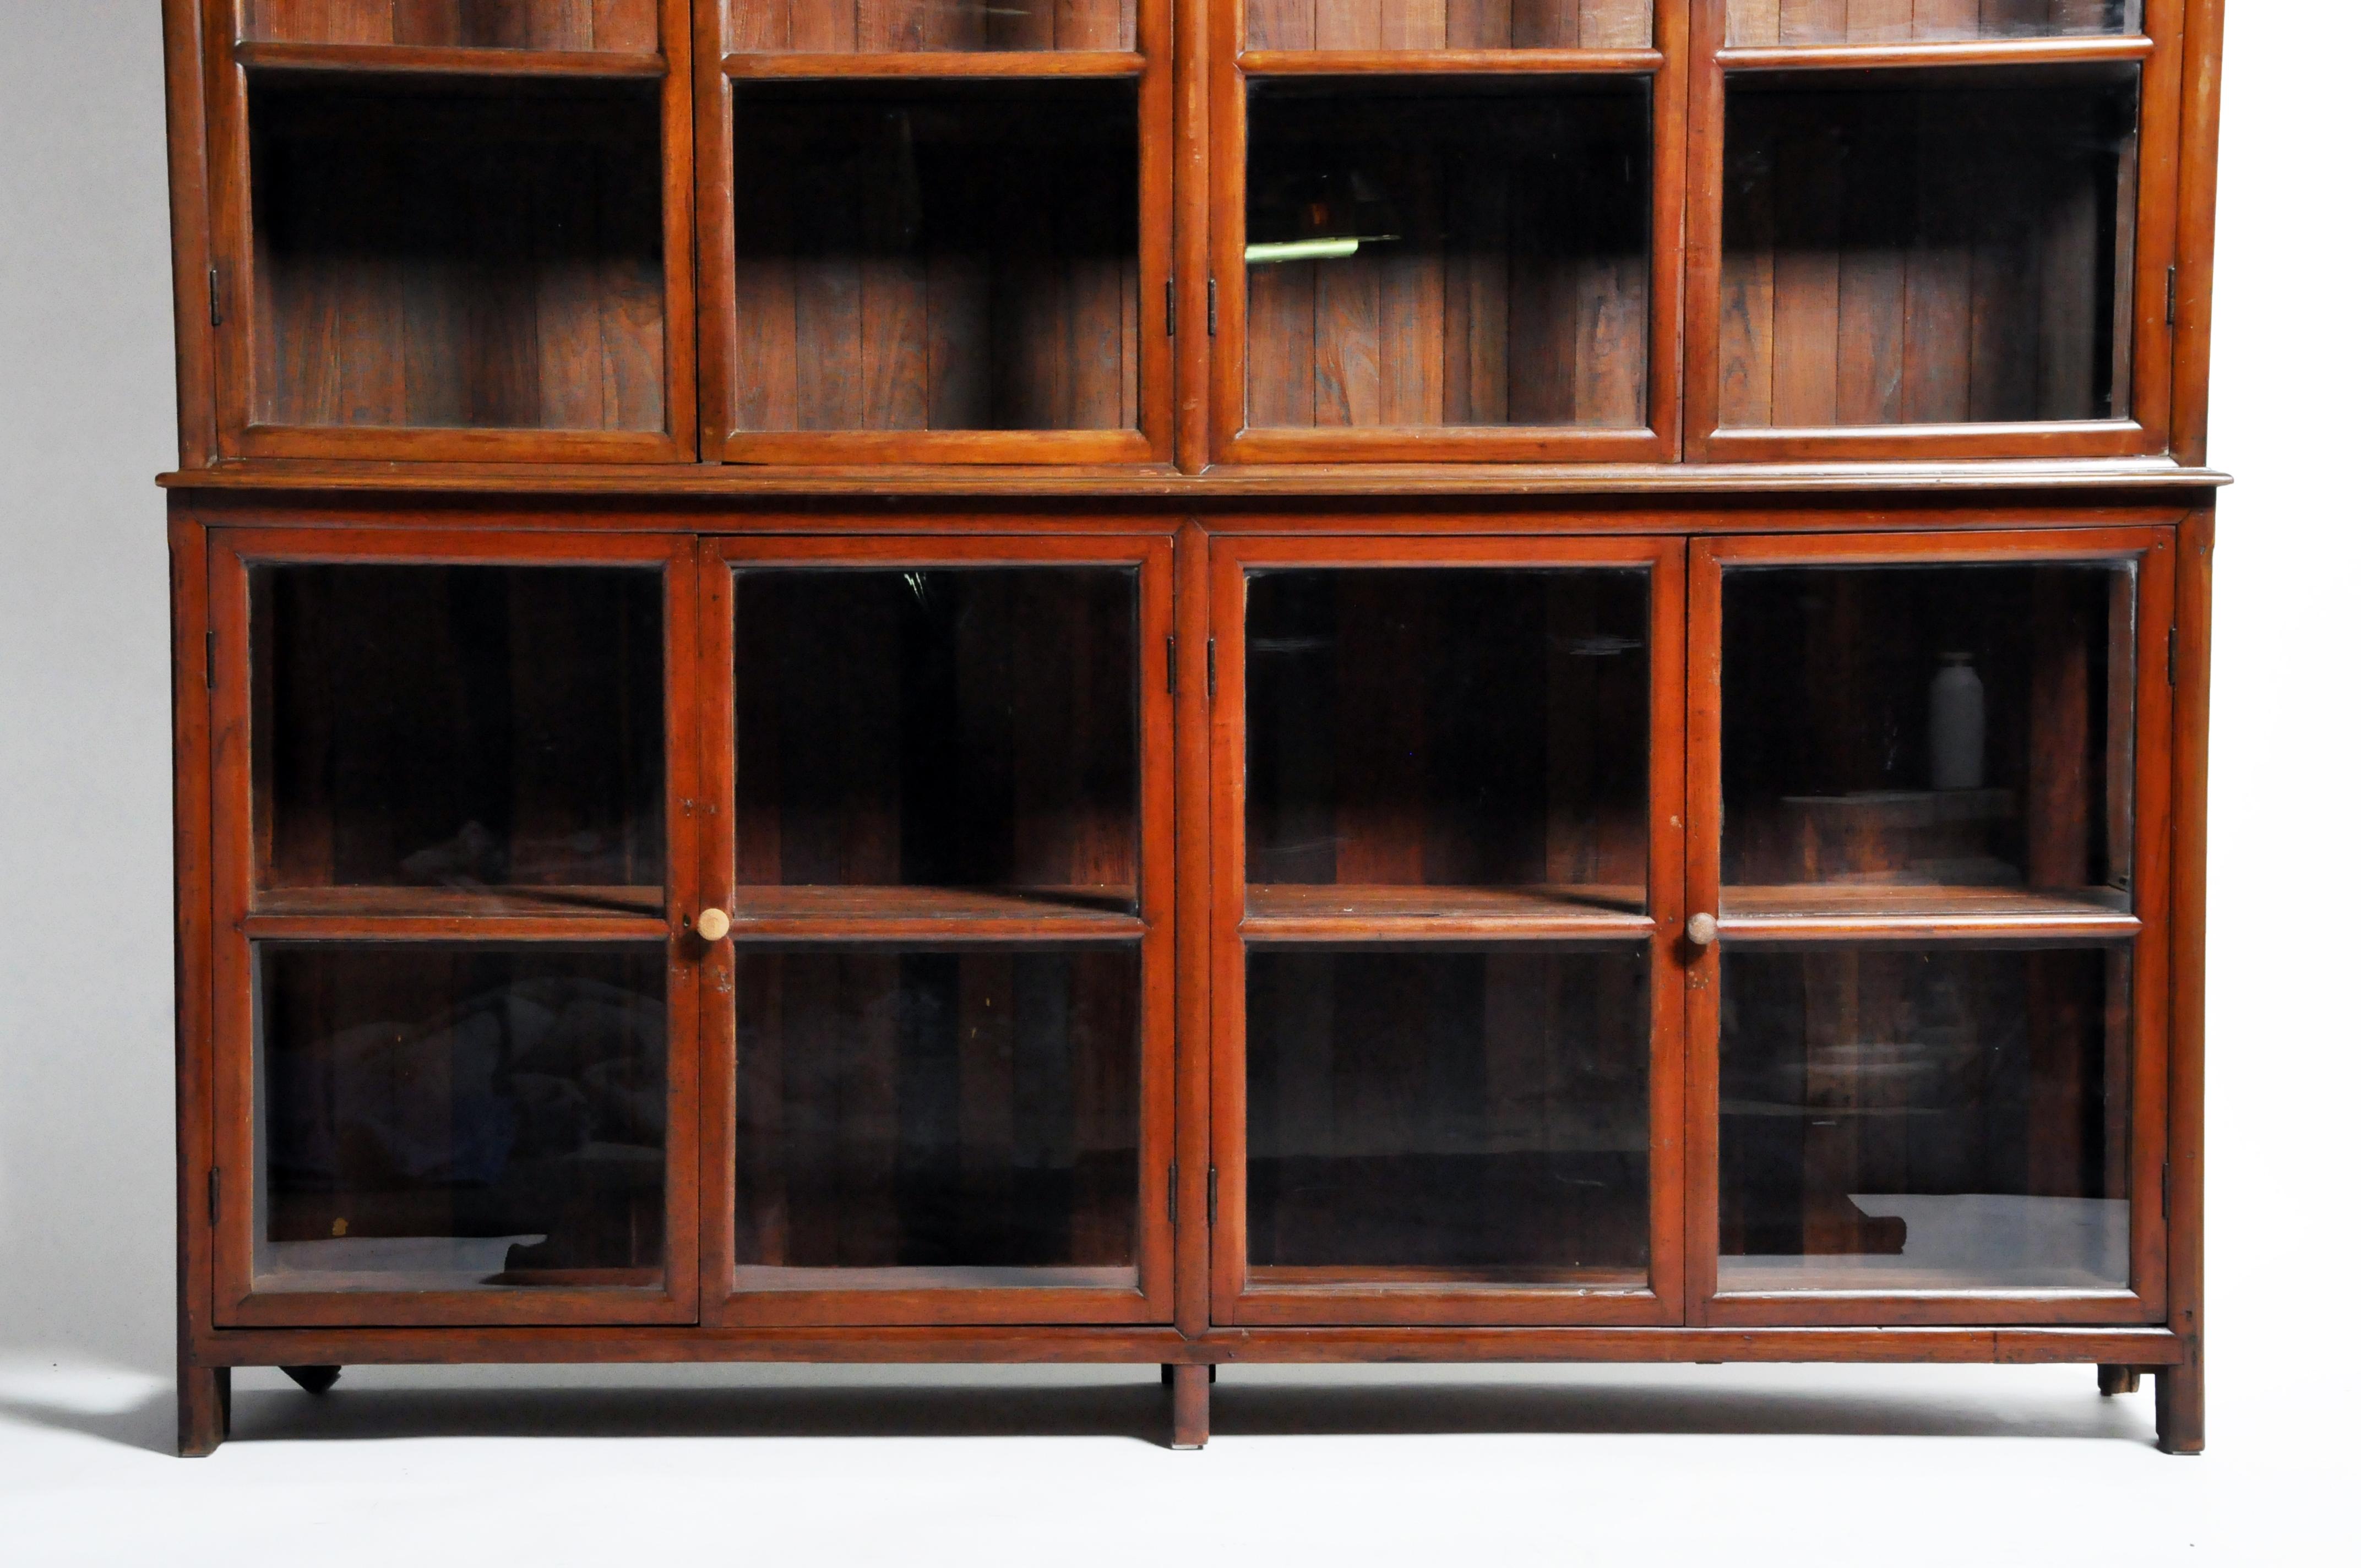 British Colonial Art Deco Breakfront Bookcase with Four Pairs of Doors 1